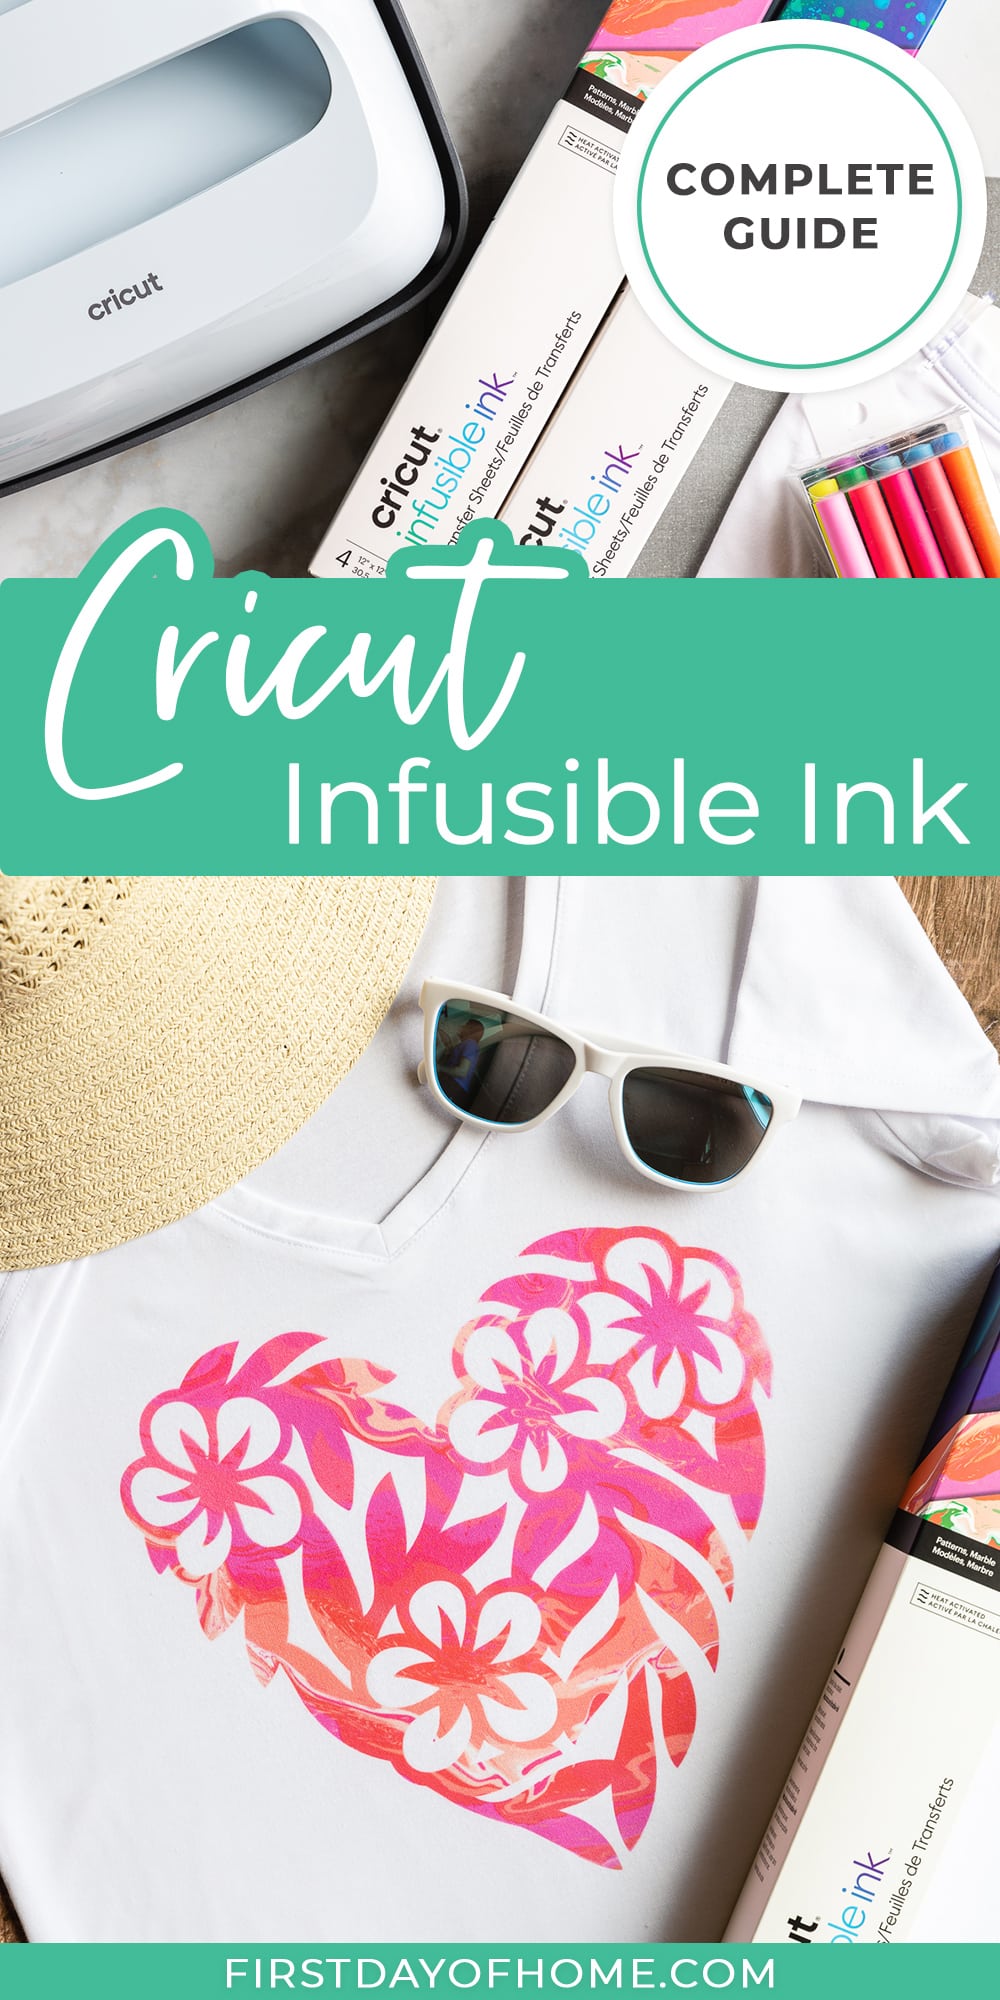 Infusible ink supplies and shirt made with infusible ink. Text overlay reads "Cricut infusible ink"